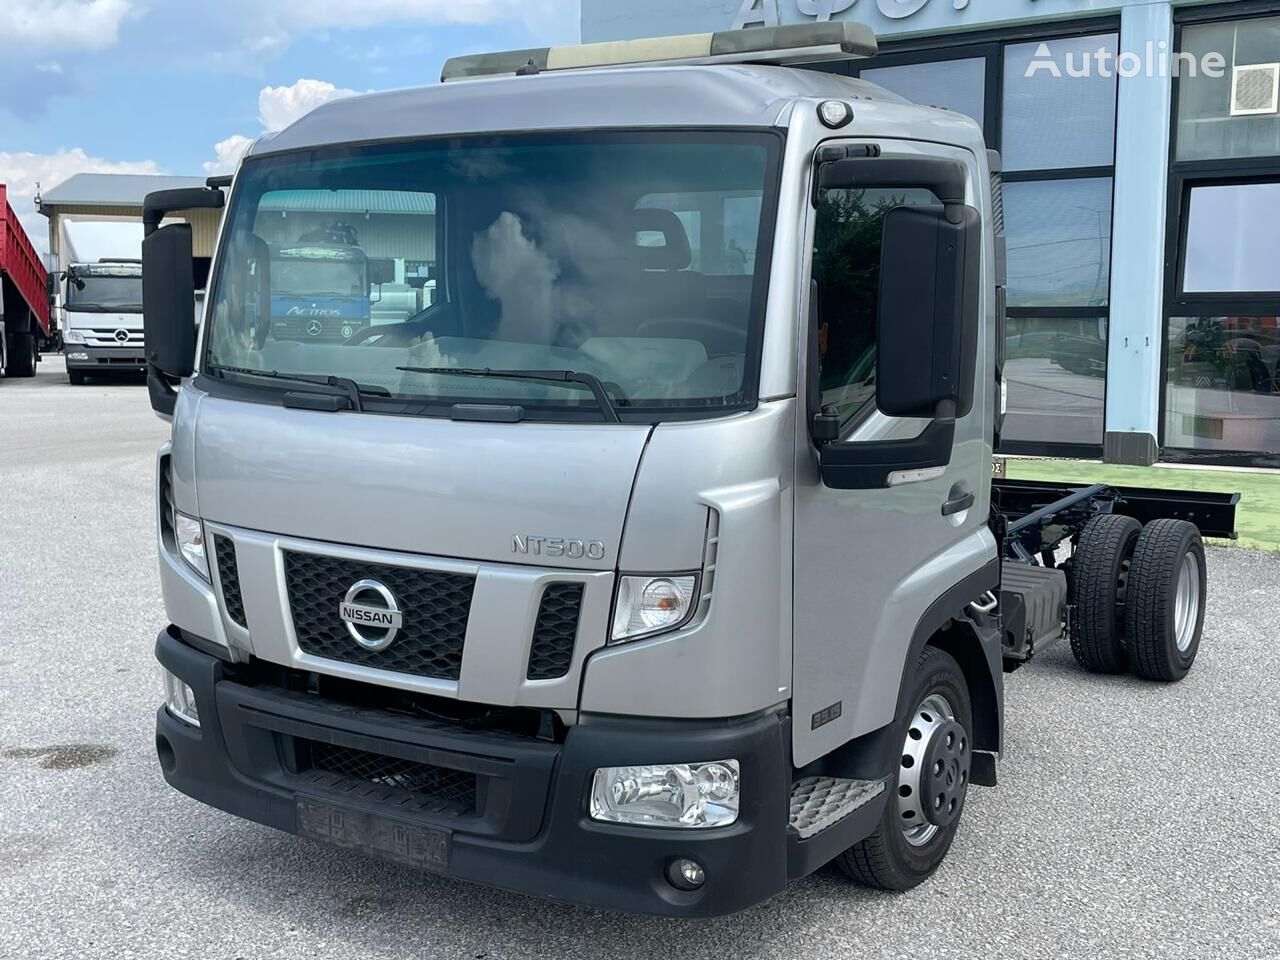 Nissan NT 500 / EURO 6 chassis truck